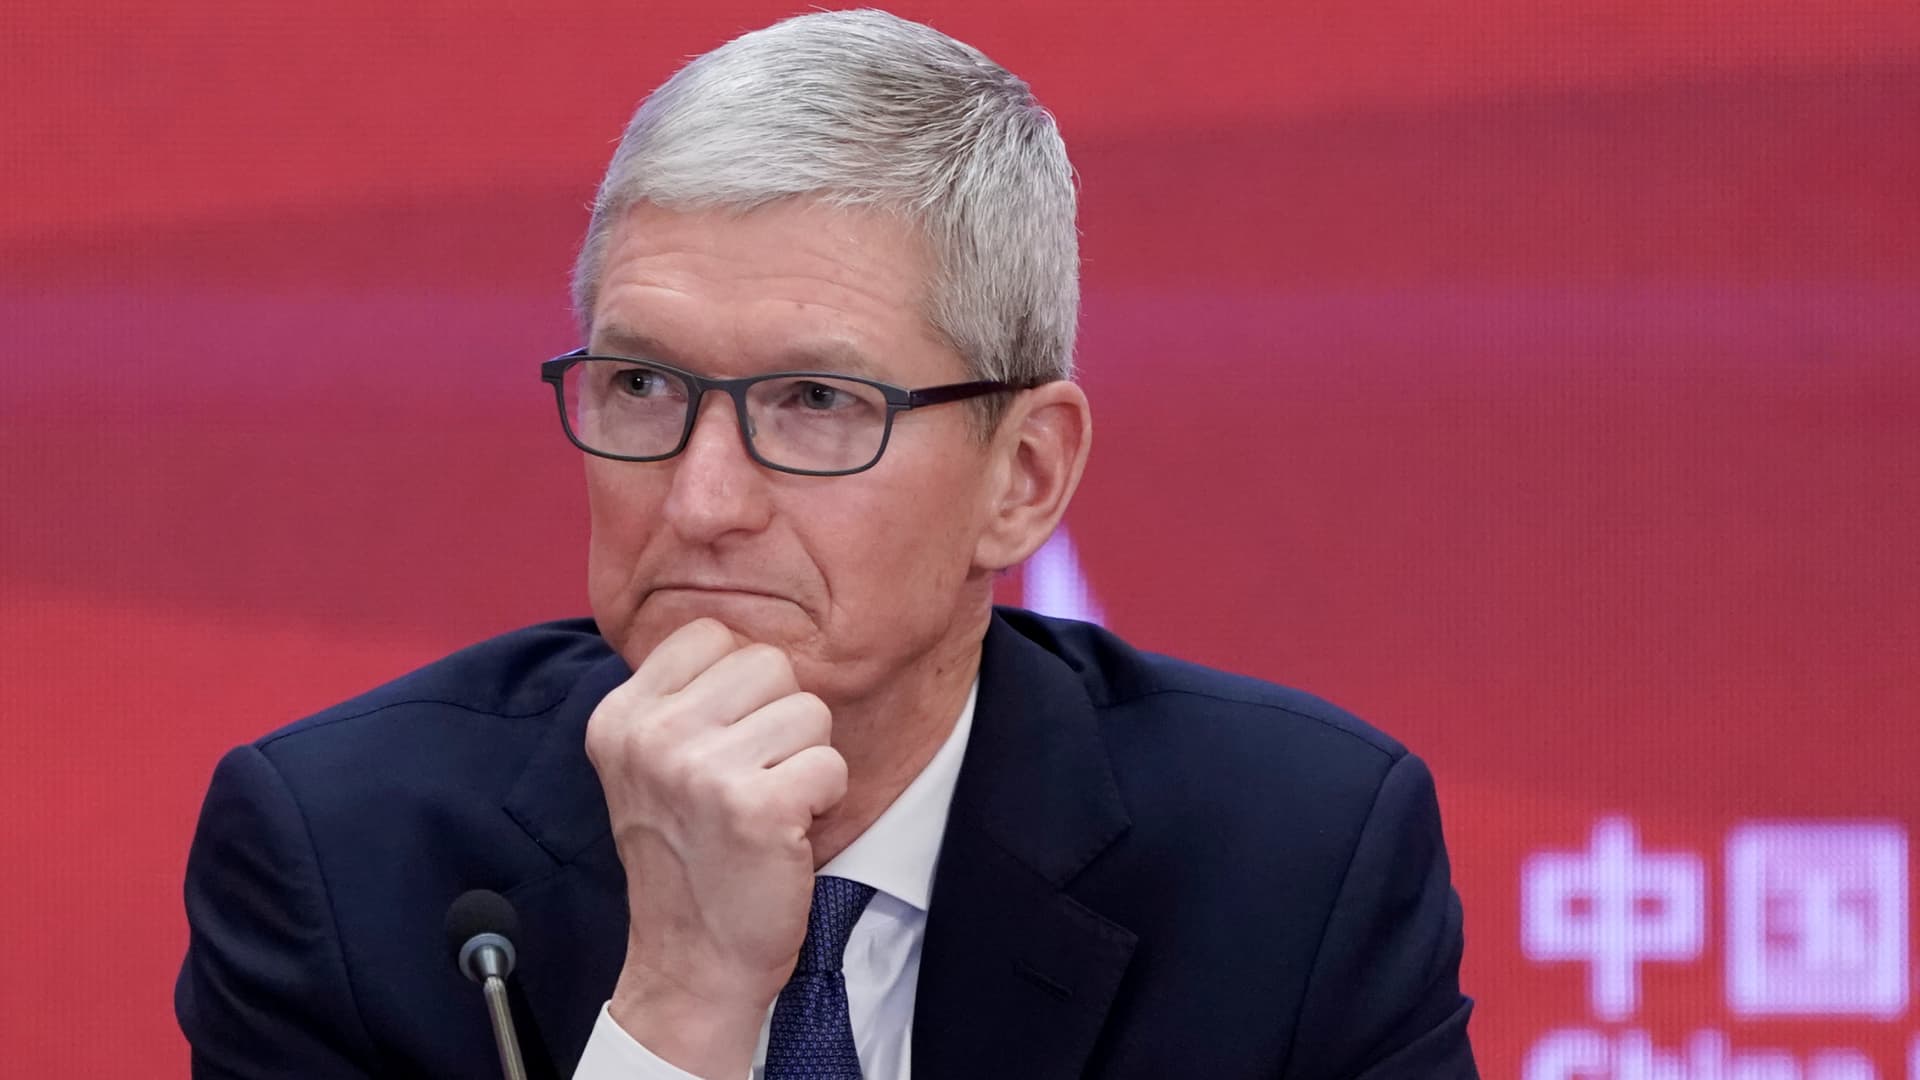 Apple's sales plunged in China — these are the iPhone giant's 5 biggest problems right now